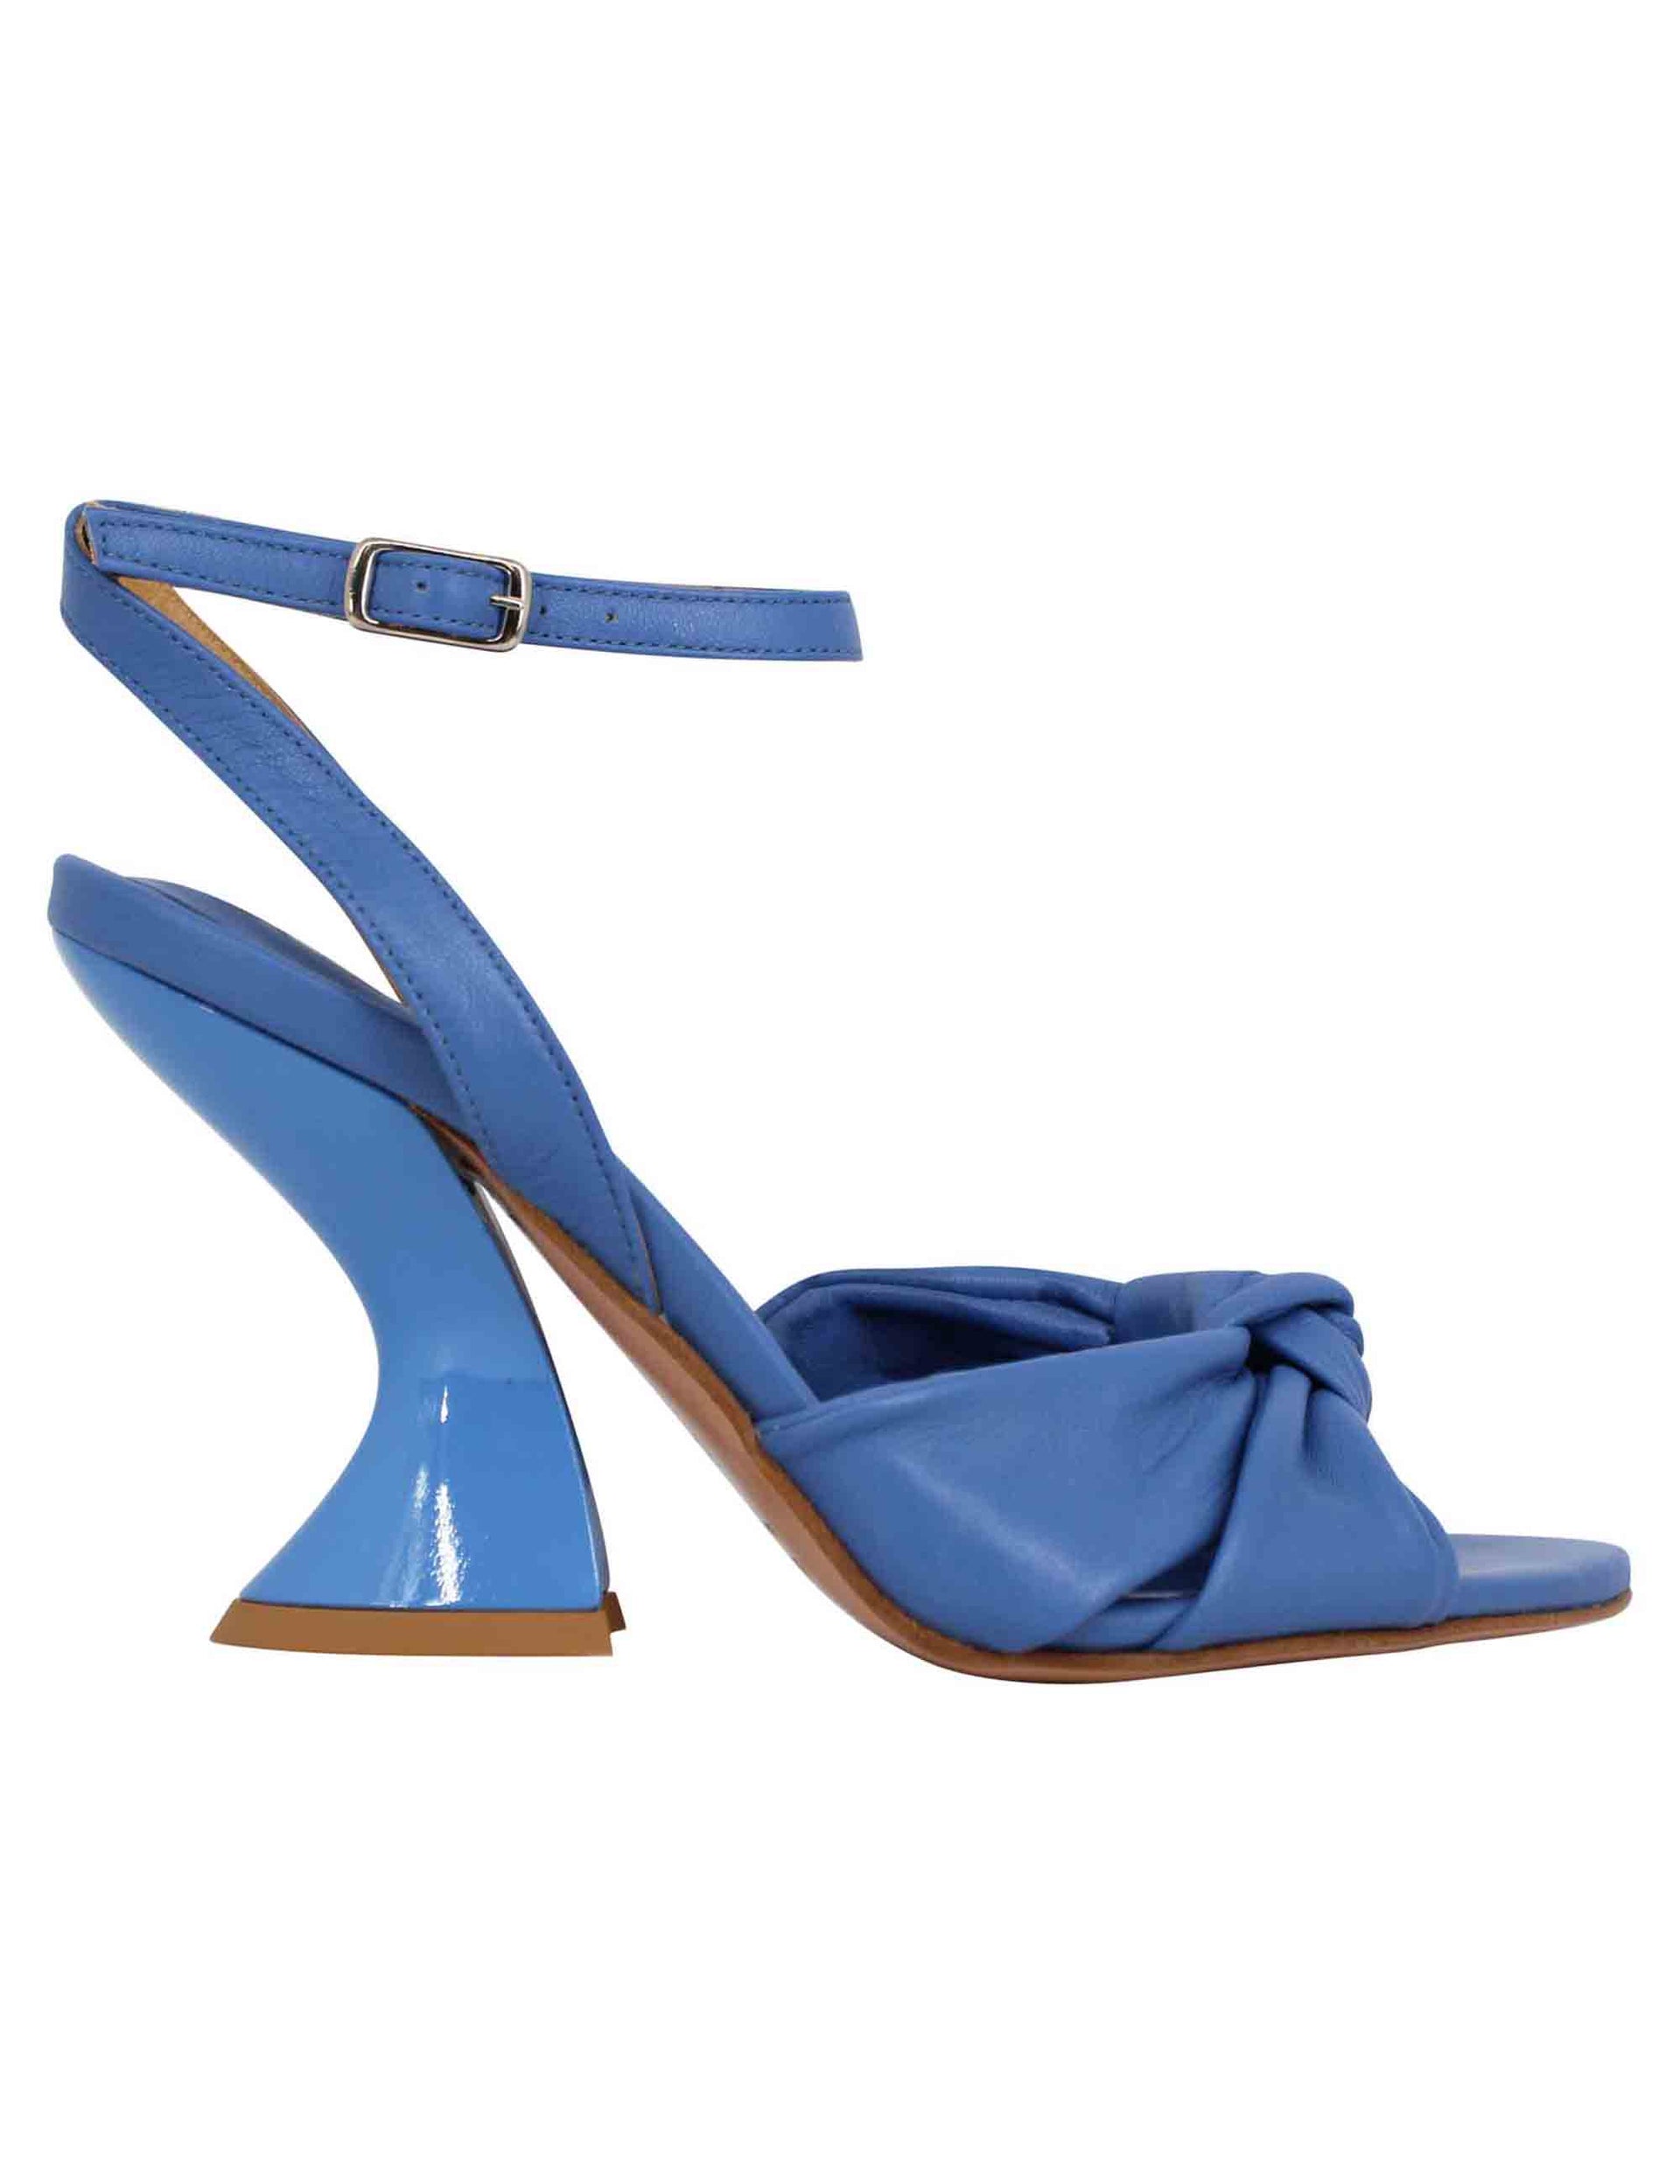 Women's blue leather sandals with high heel and ankle strap